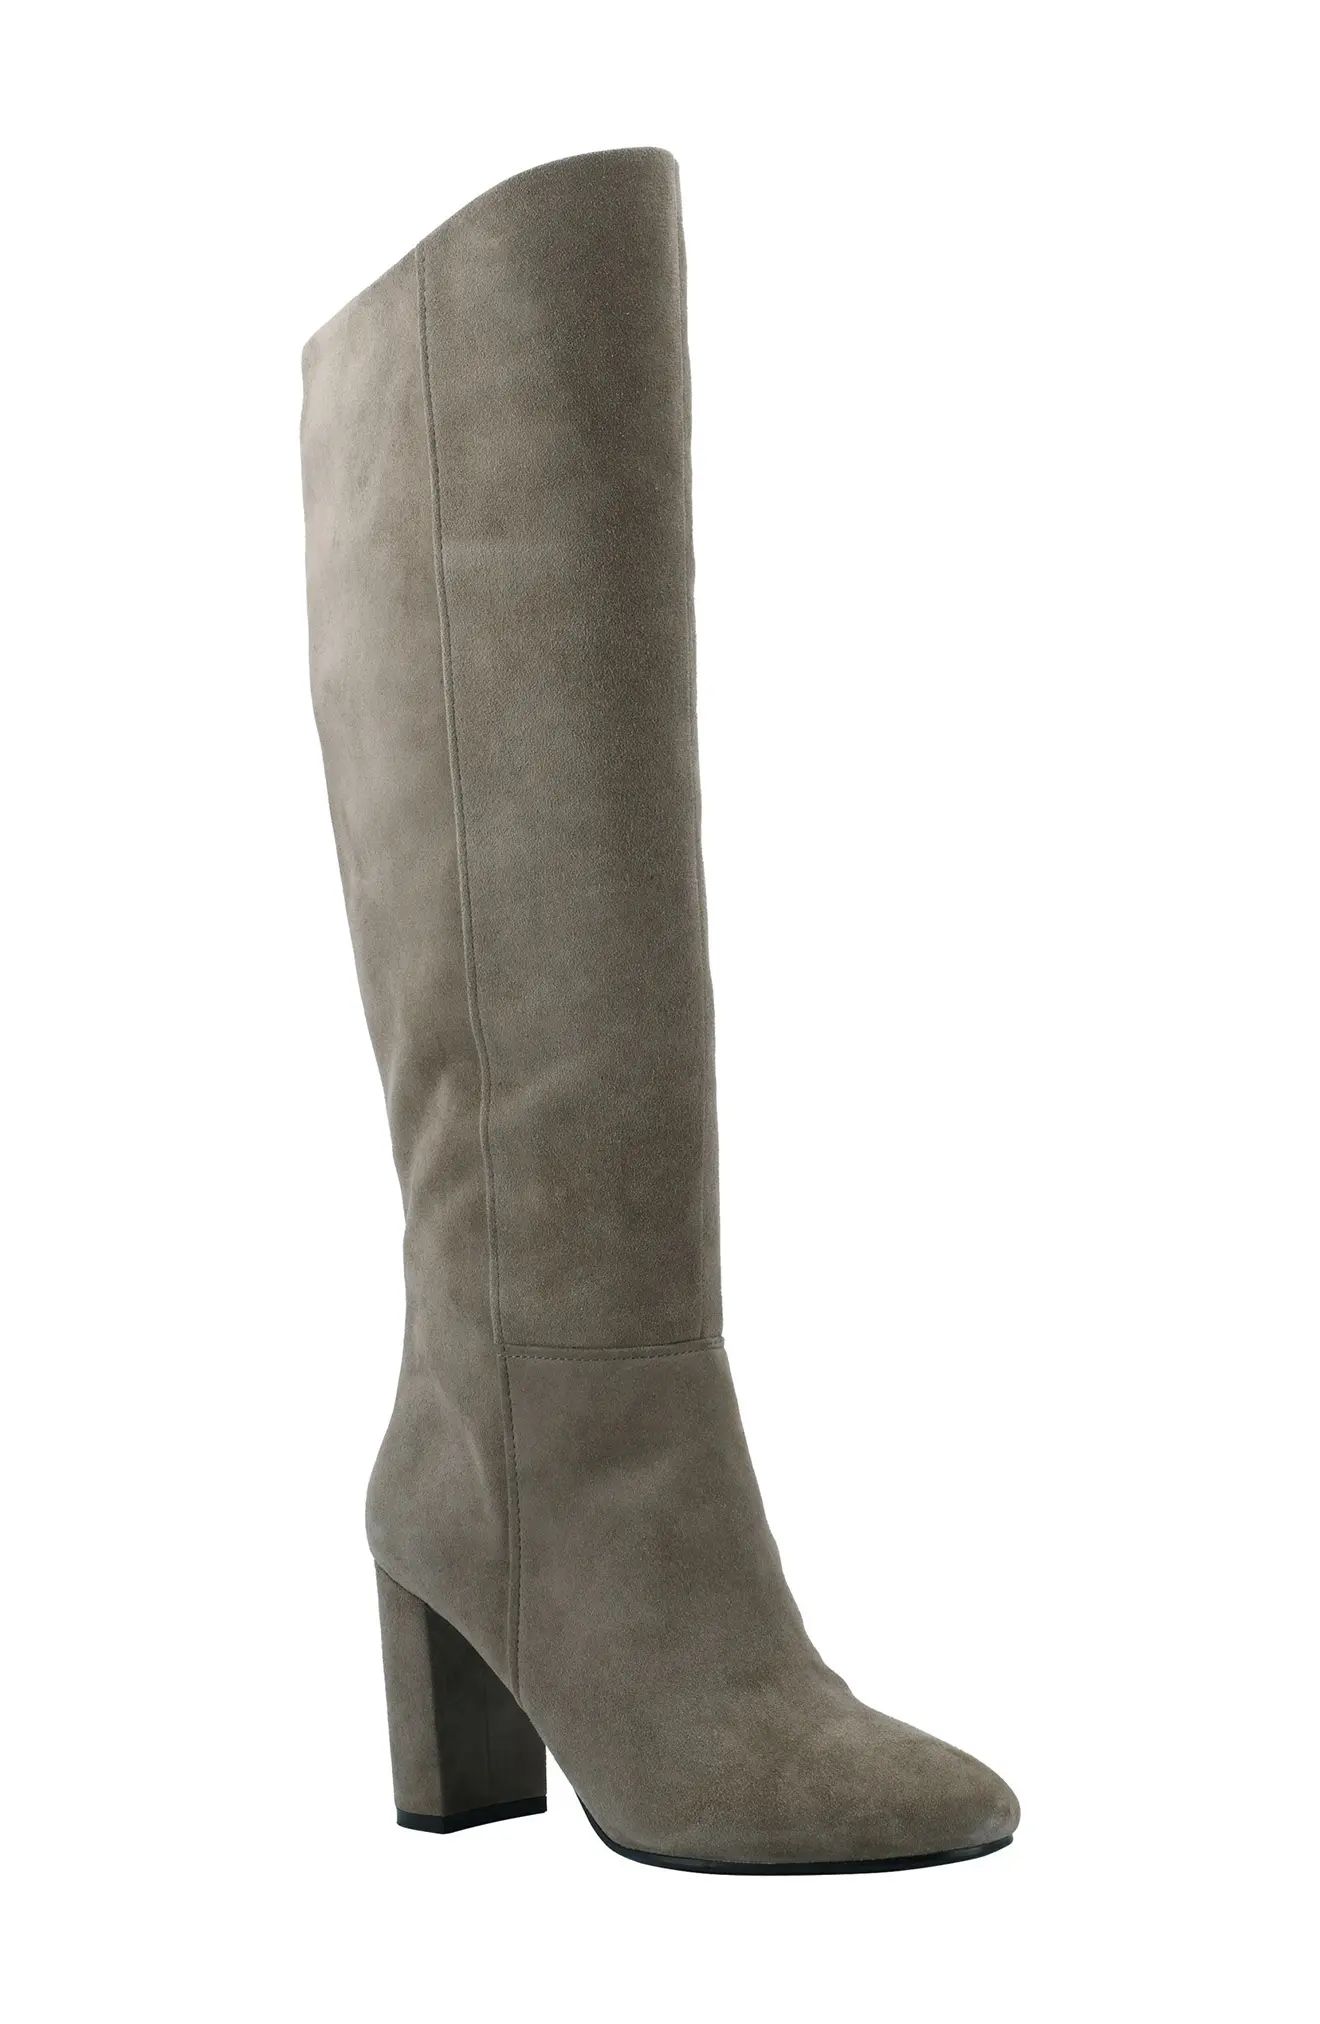 Calvin Klein Almay Knee High Boot in Taupe at Nordstrom, Size 5 | Nordstrom